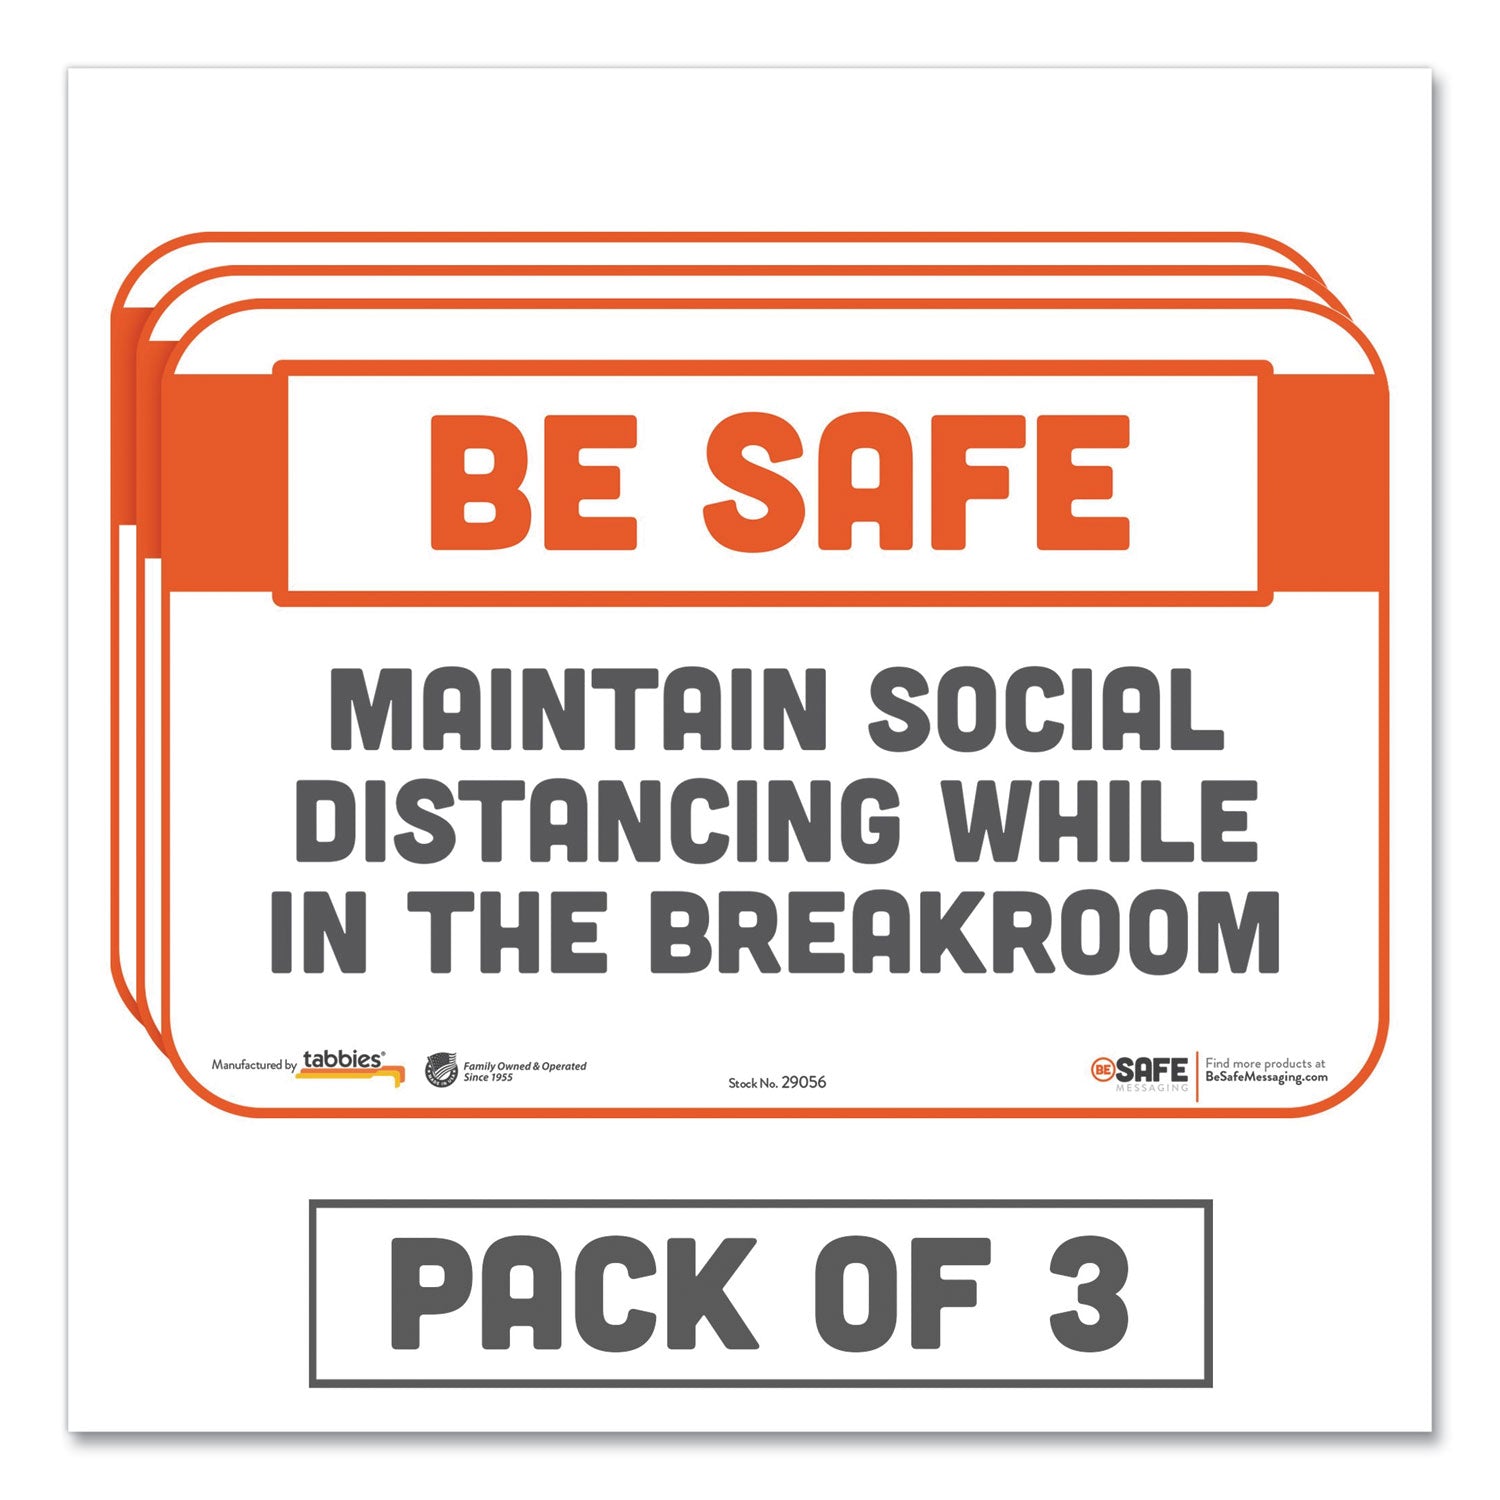 besafe-messaging-repositionable-wall-door-signs-9-x-6-maintain-social-distancing-while-in-the-breakroom-white-3-pack_tab29056 - 1